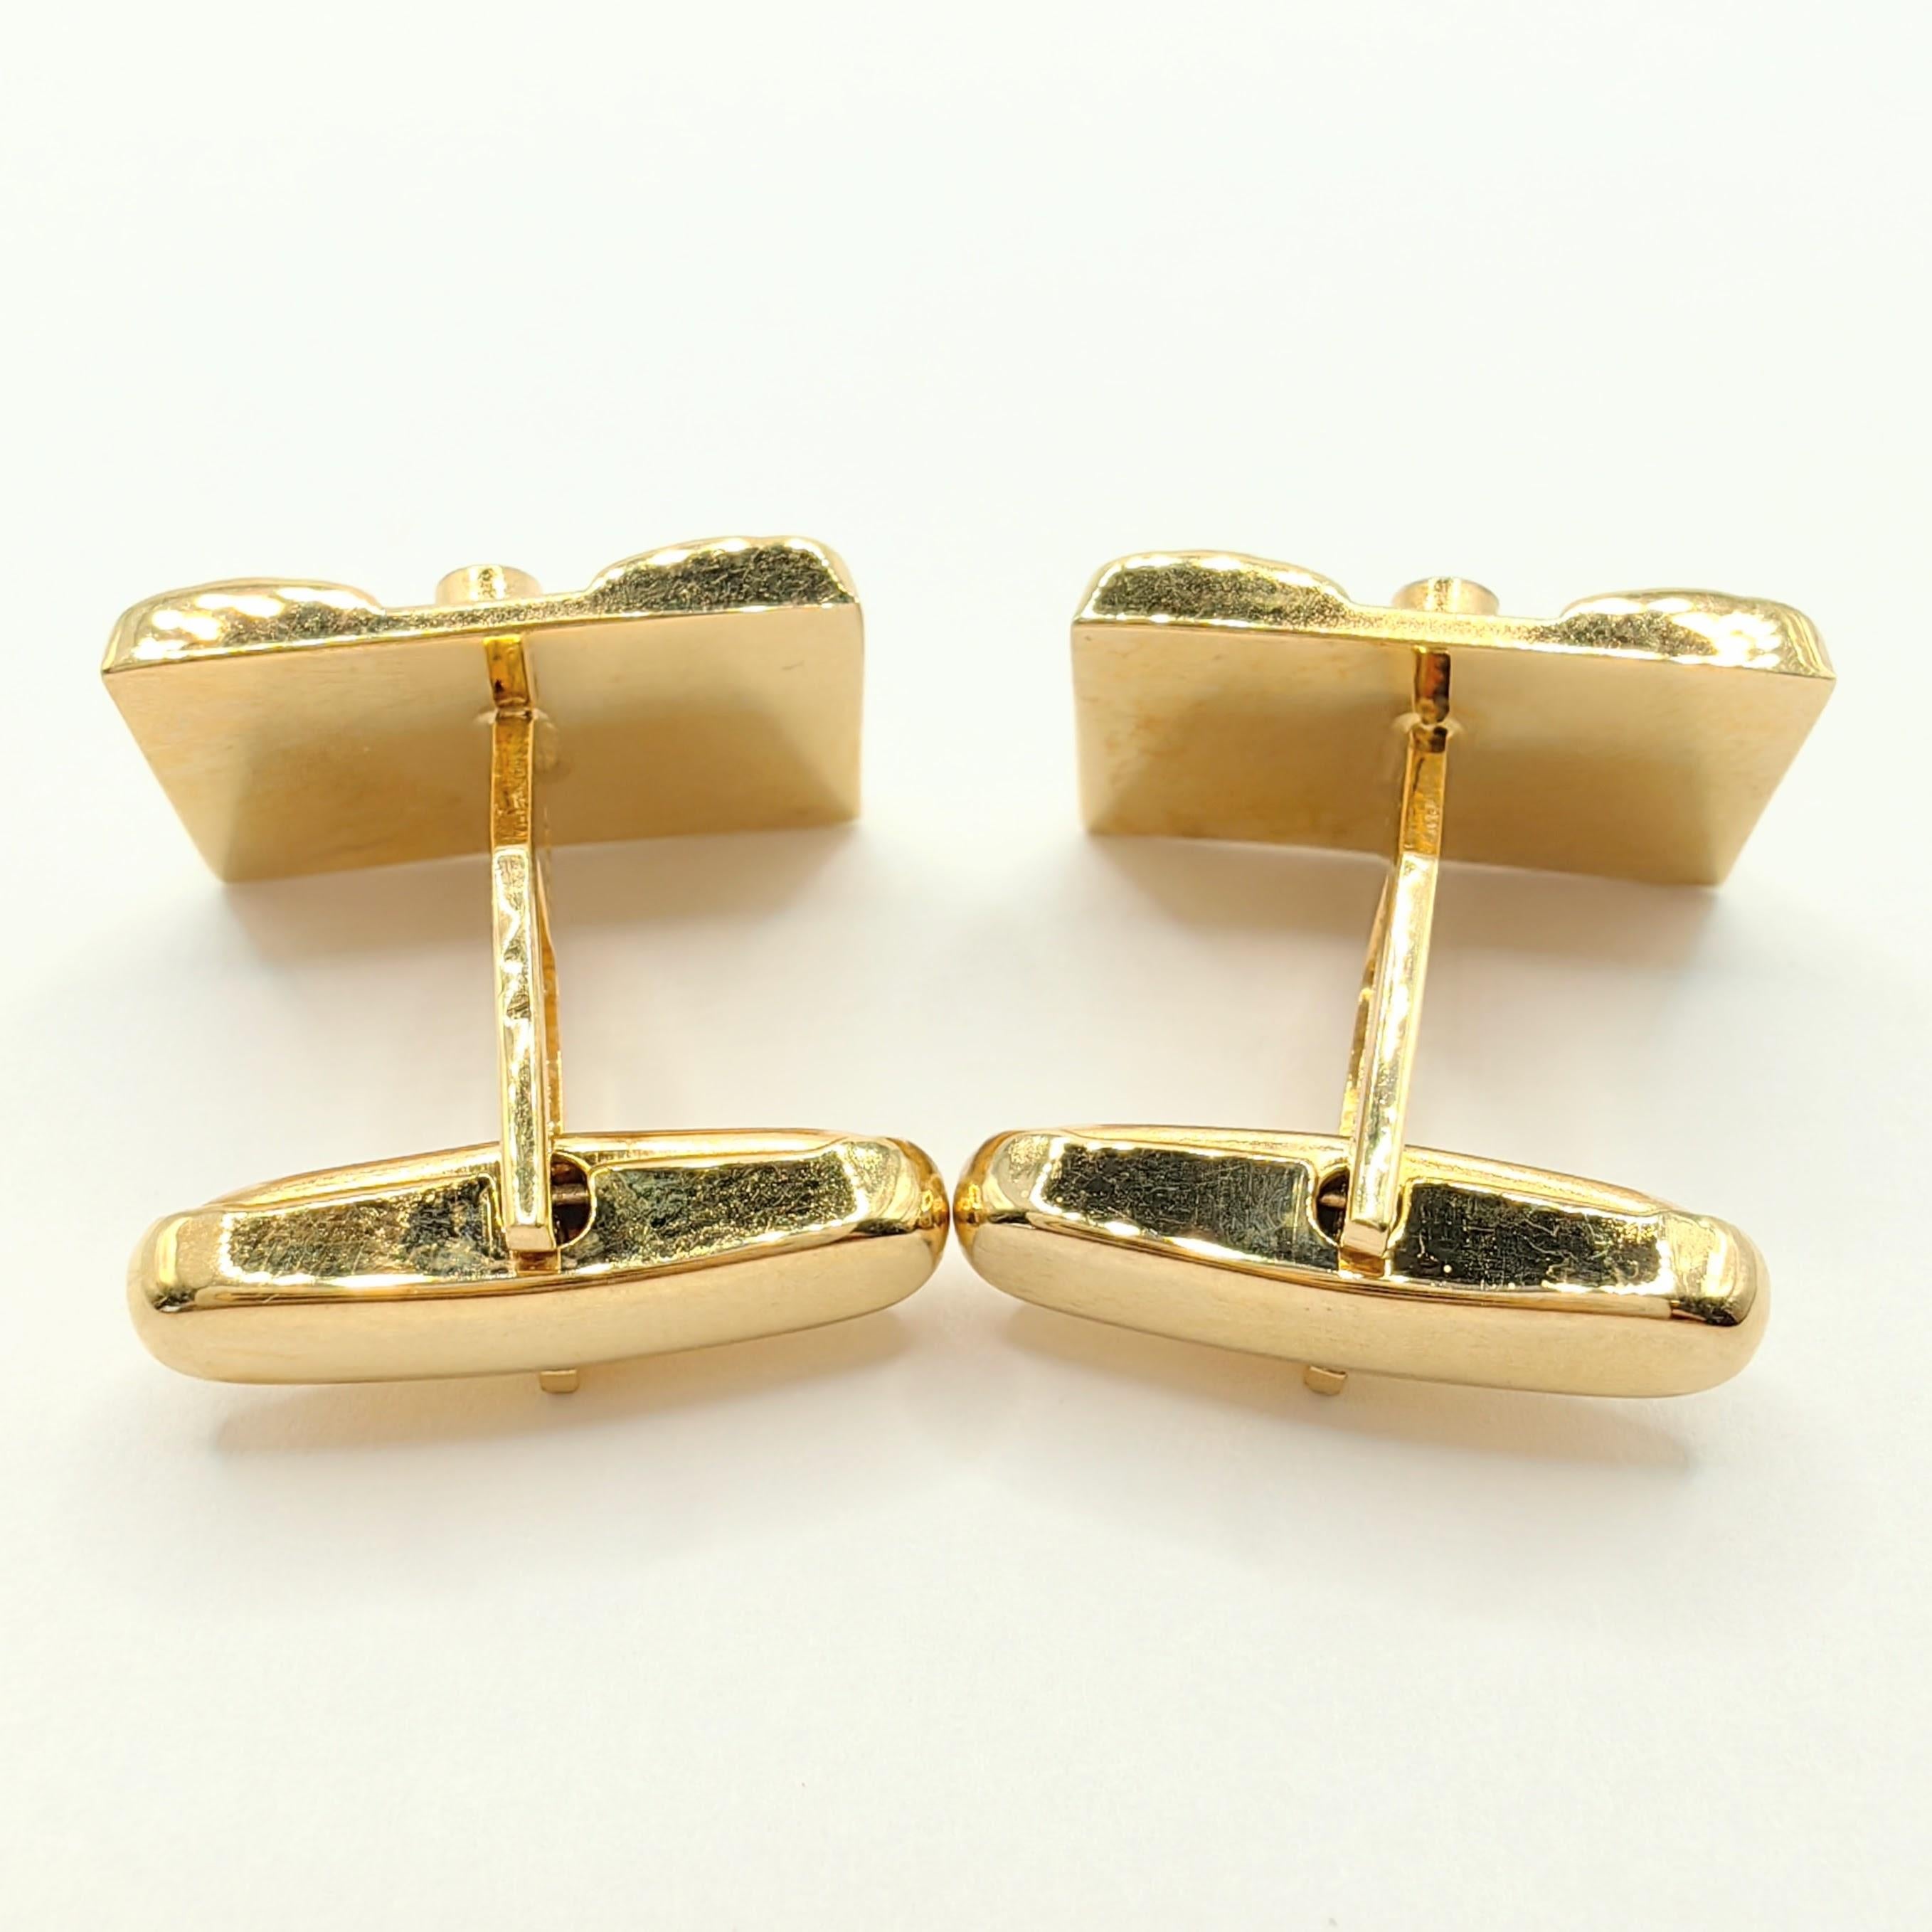 Contemporary Vintage Geometric Design Cufflinks in 18K Yellow & White Two-tone Gold